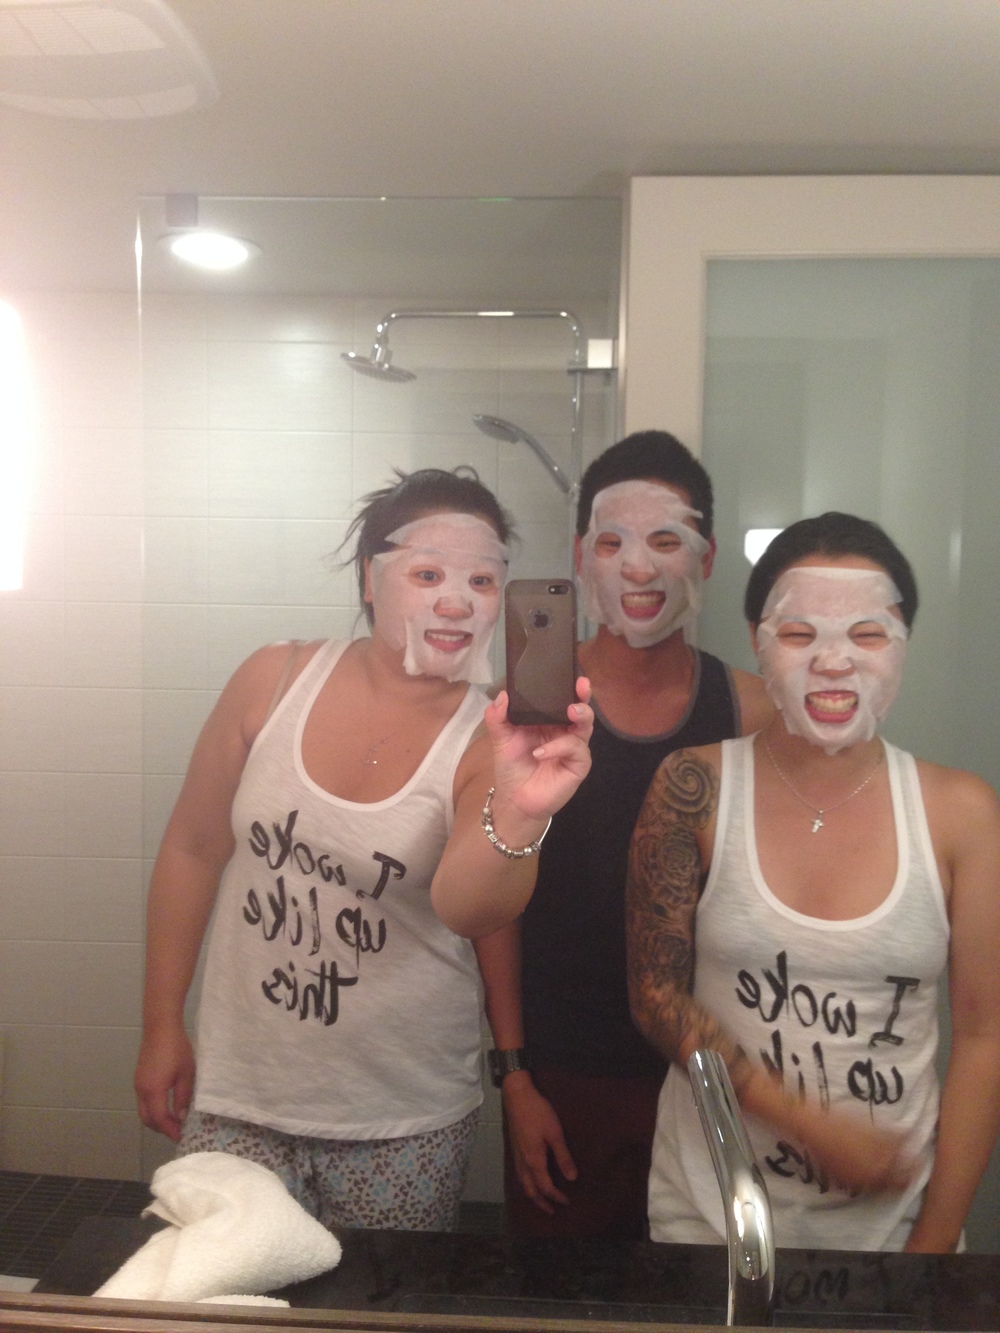 ... or sometimes the bride asks you do a face mask the night before with the bridal party.